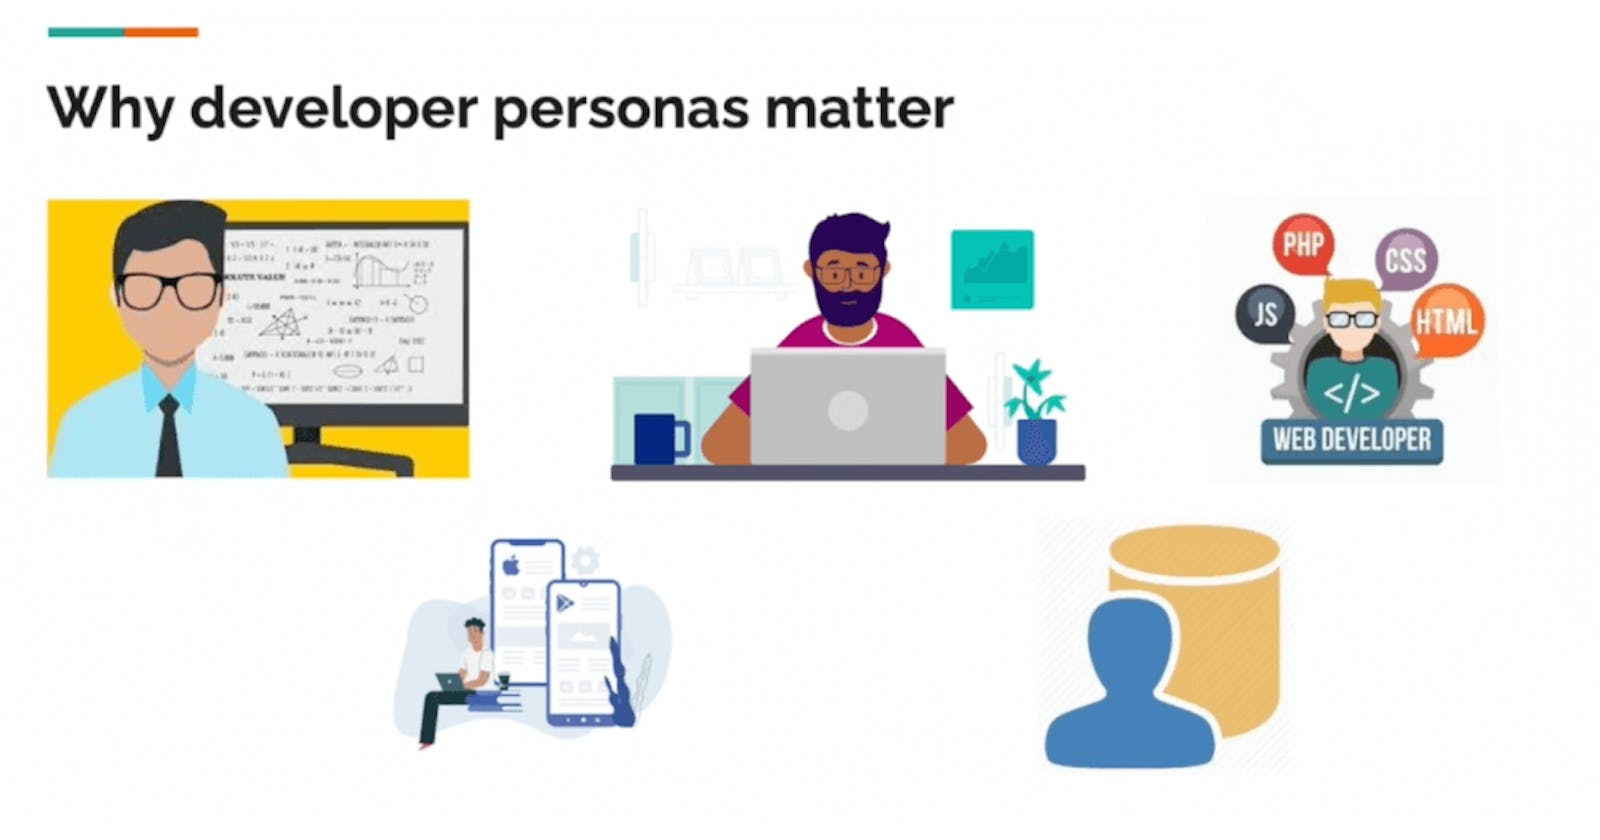 What are developer personas and why do they matter?